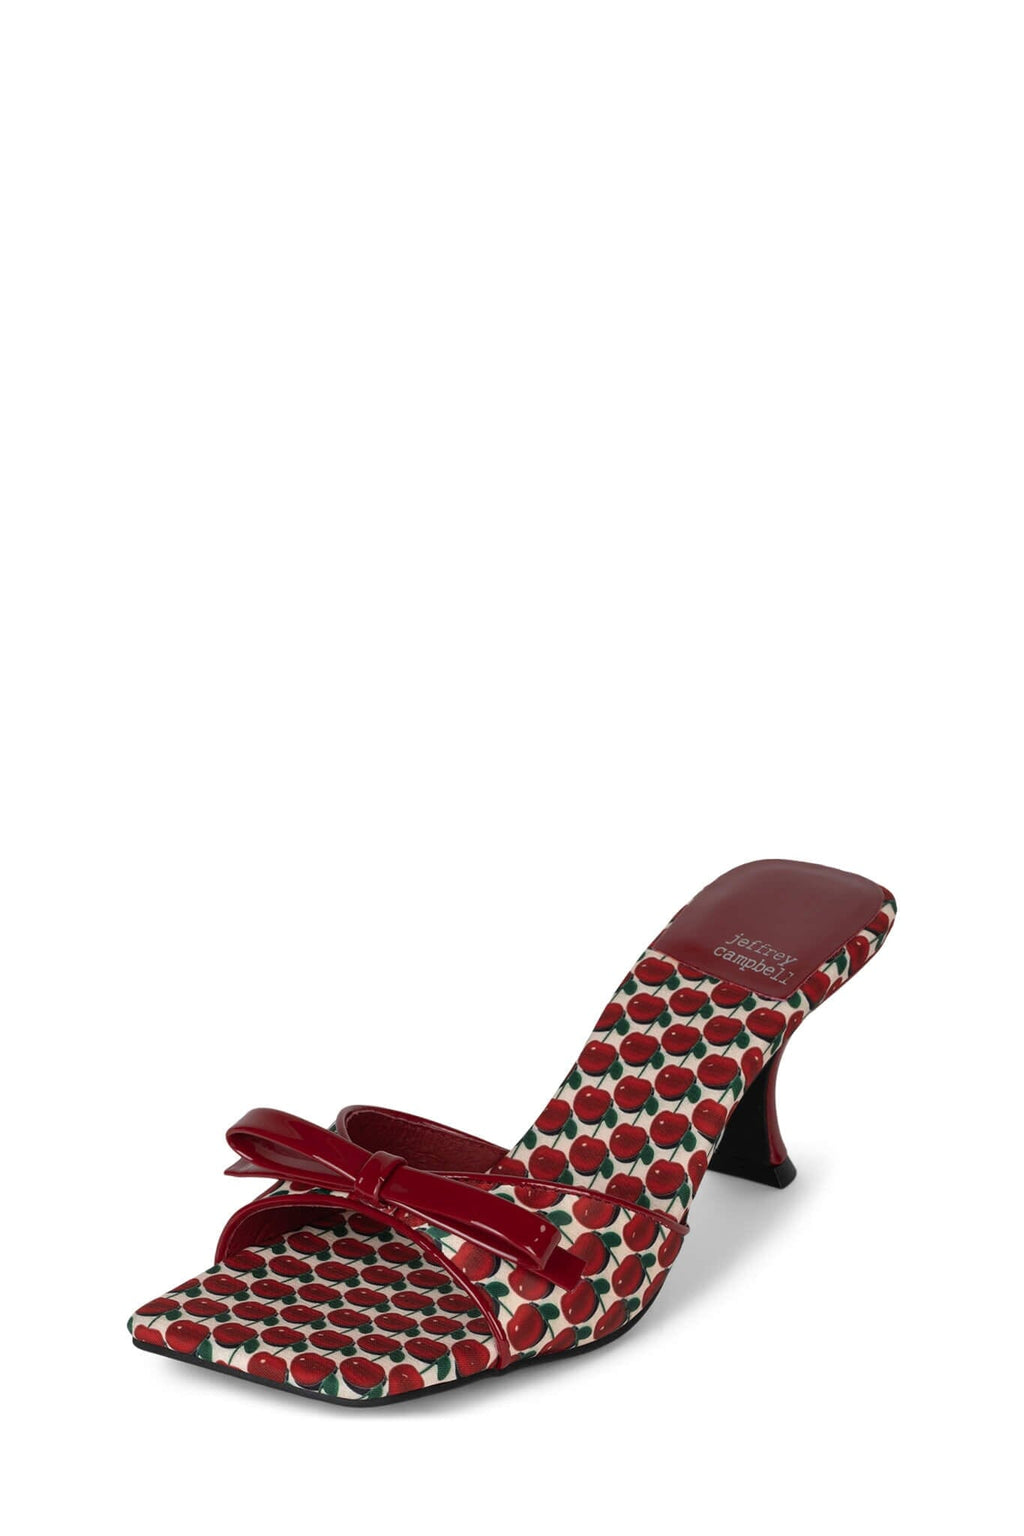 SWEET-ON-U Jeffrey Campbell Heeled Sandals Red Cherry Combo